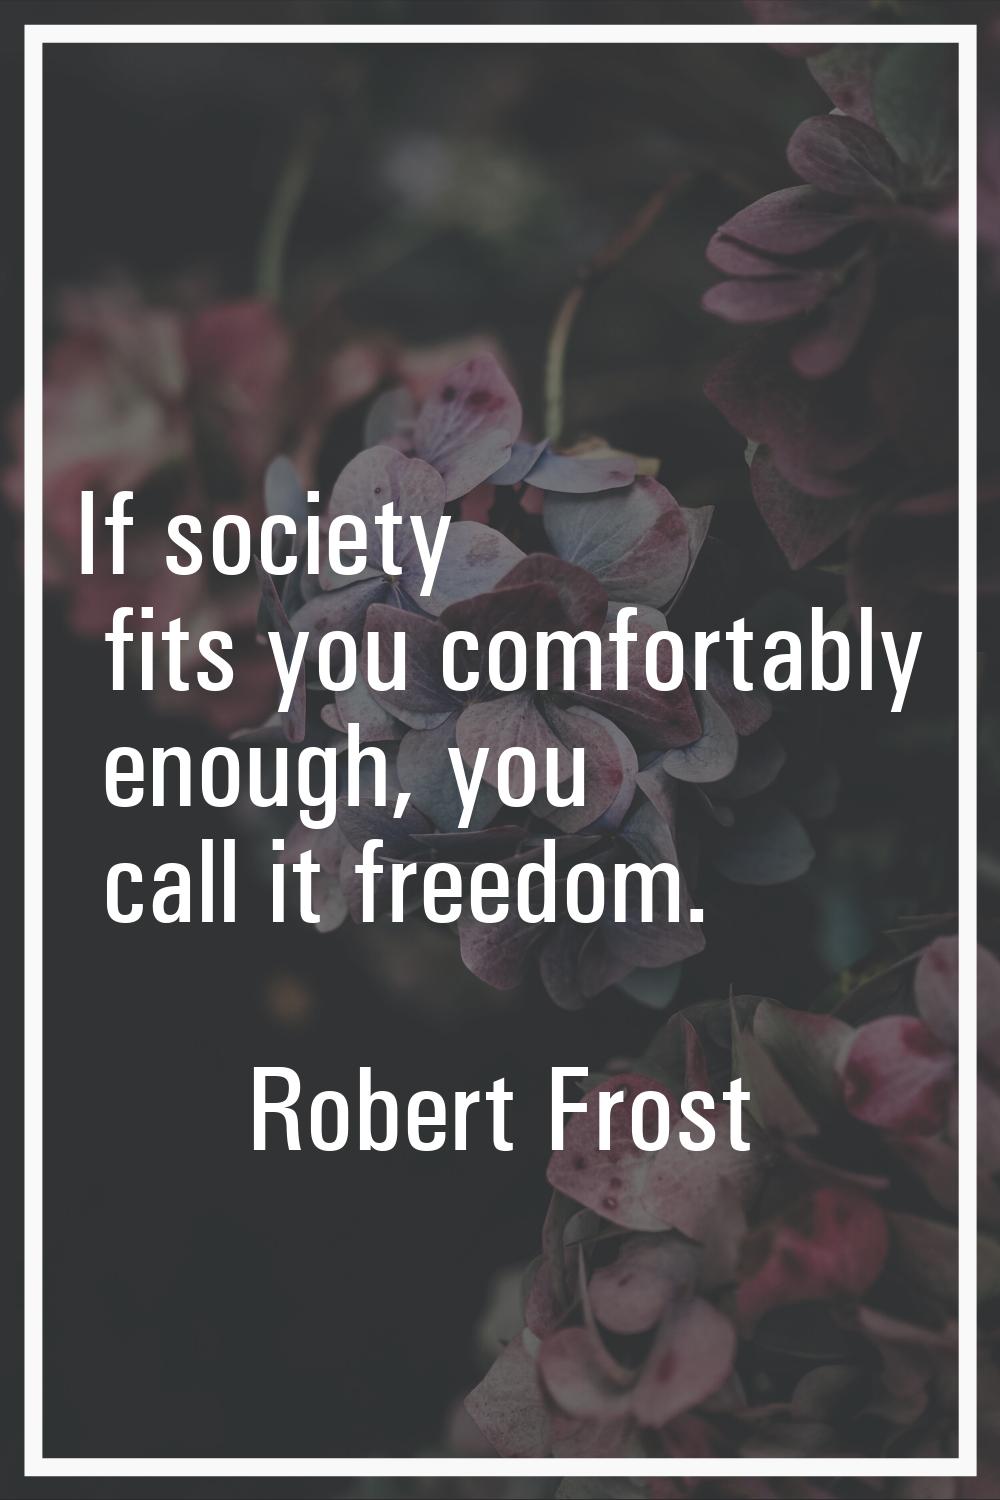 If society fits you comfortably enough, you call it freedom.